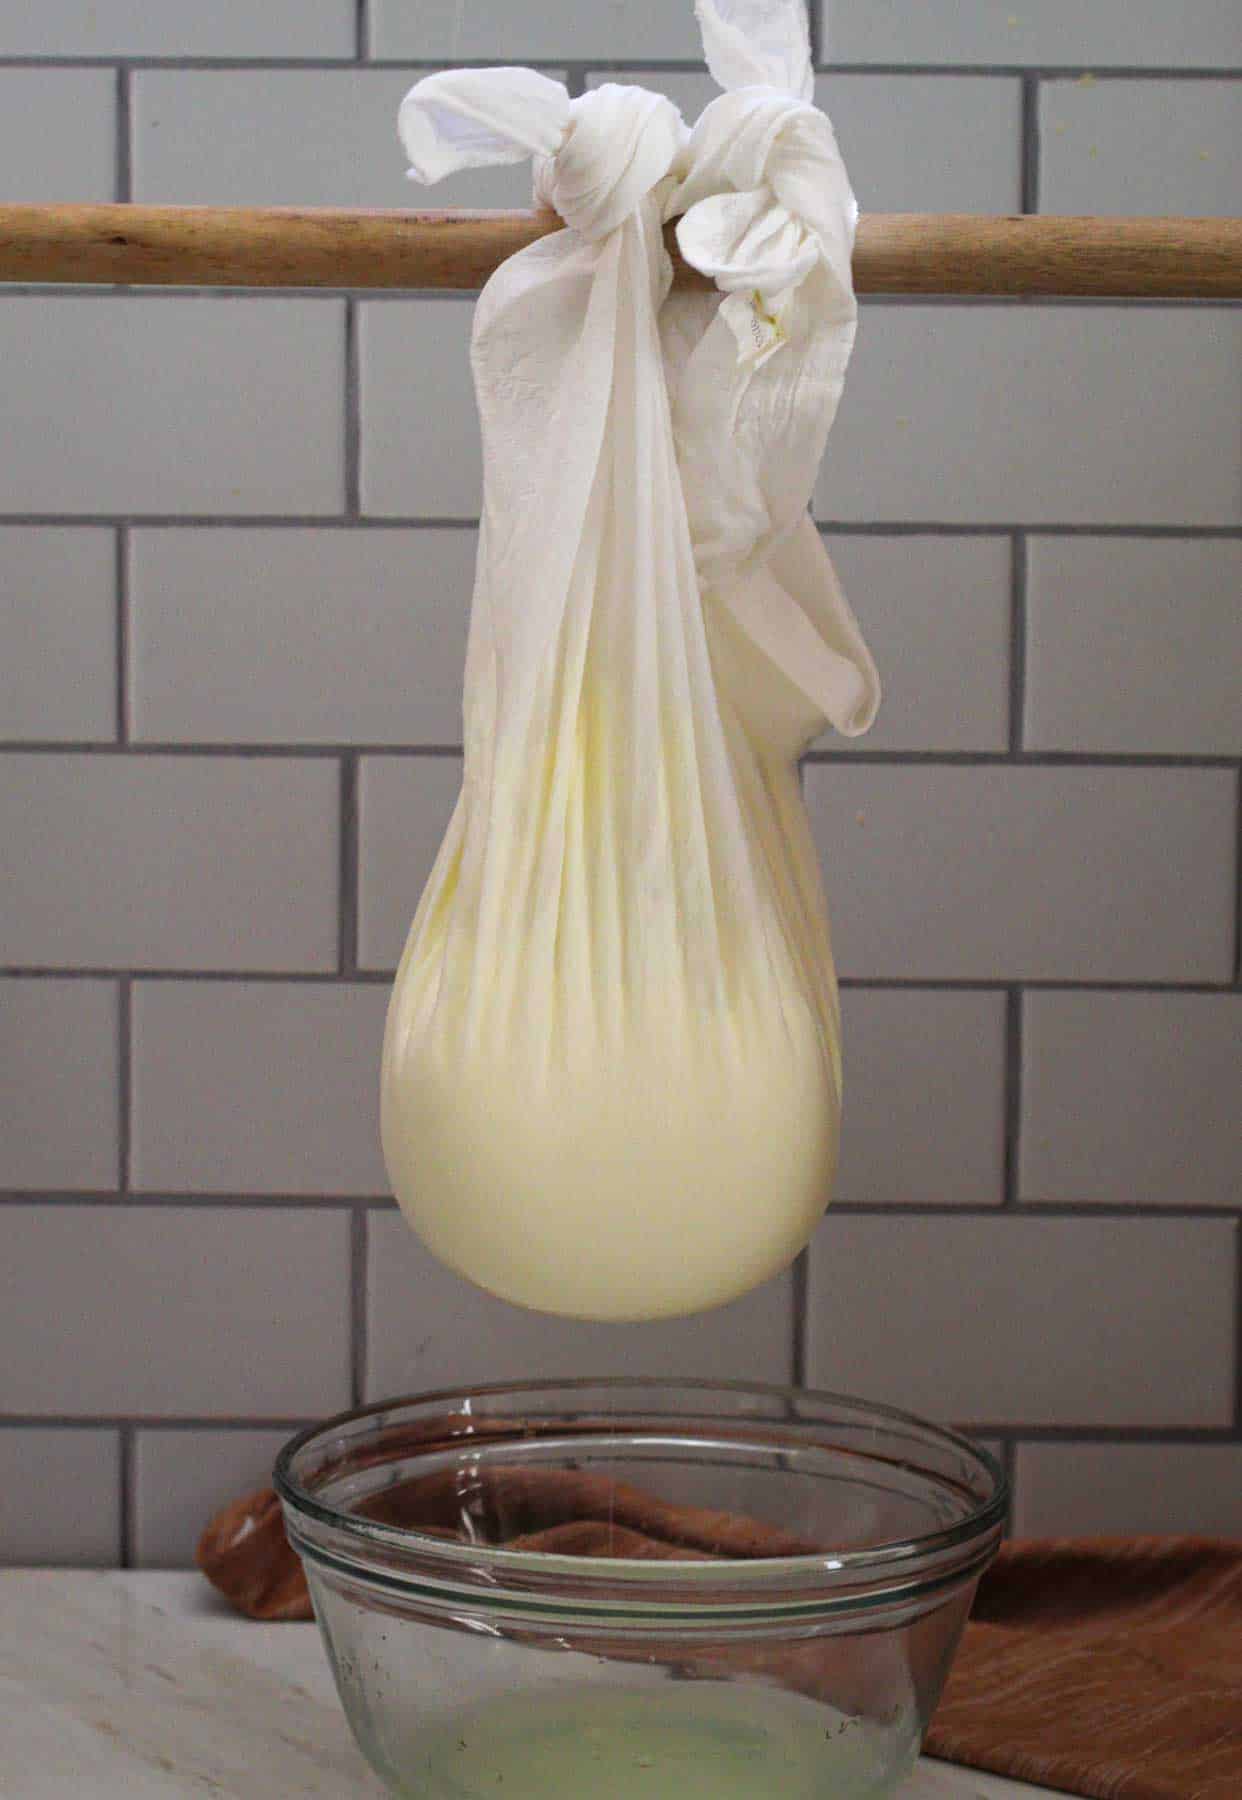 Picture shows a muslin cloth with yogurt in it, tied up and hanging from a rod. The liquid that is strained is falling over a glass container. 